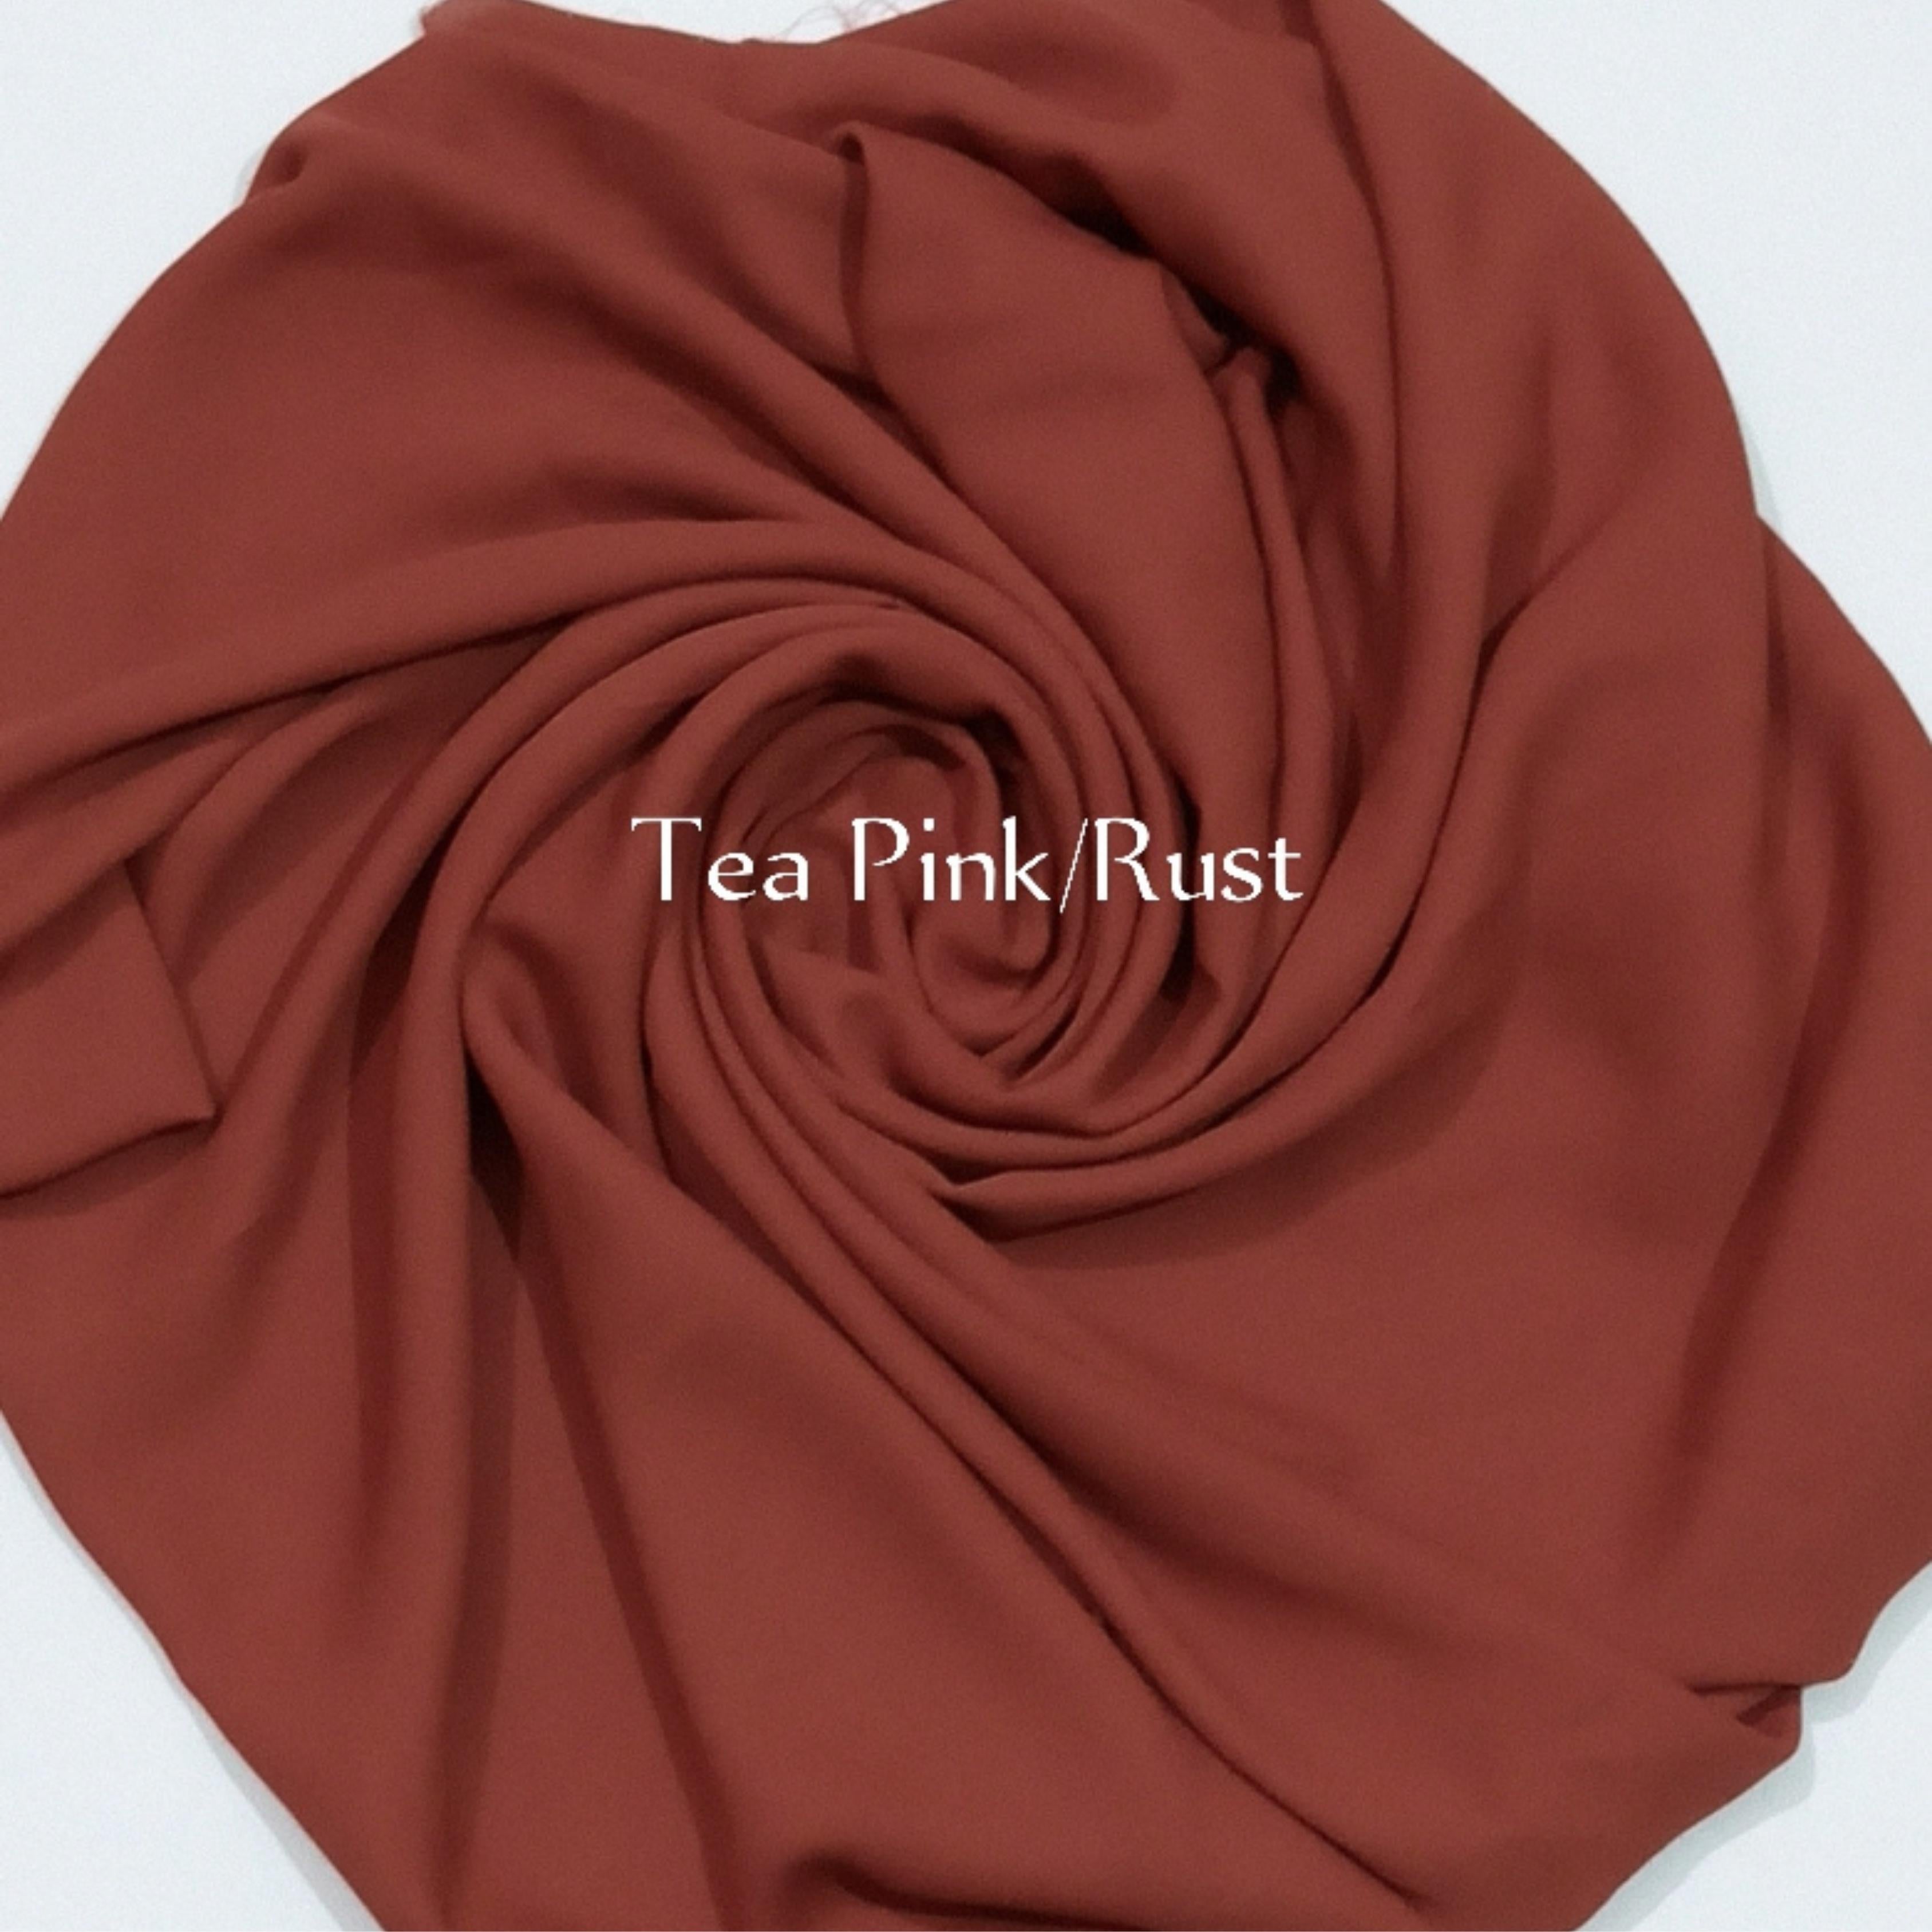 Misri Hijab With Attached Niqab with same color head undercap